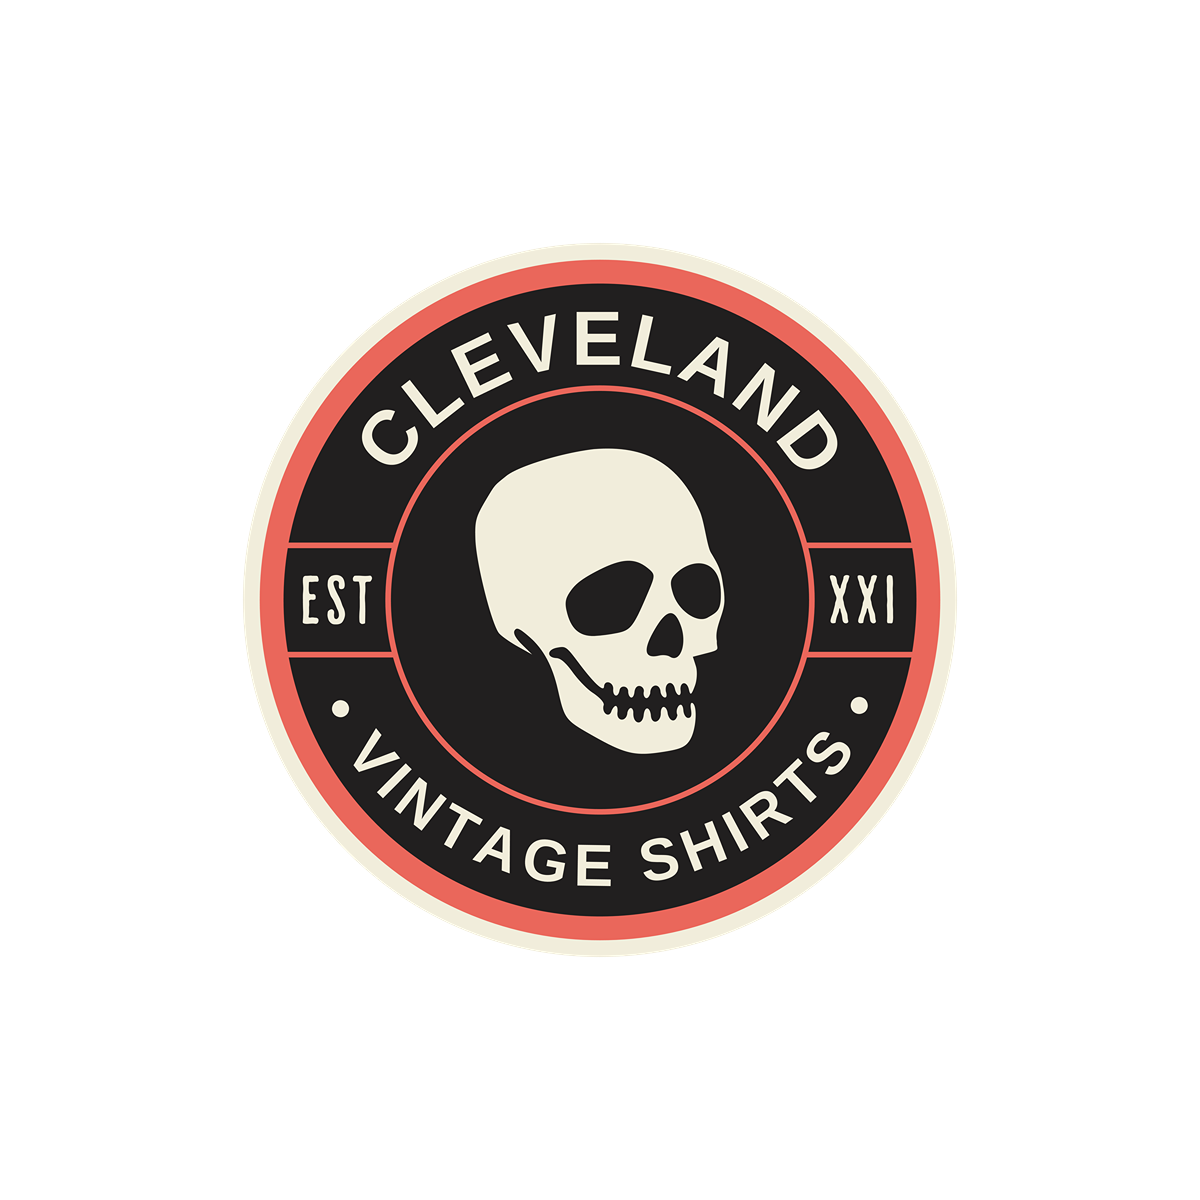 The Cleveland Apparel You're Looking For